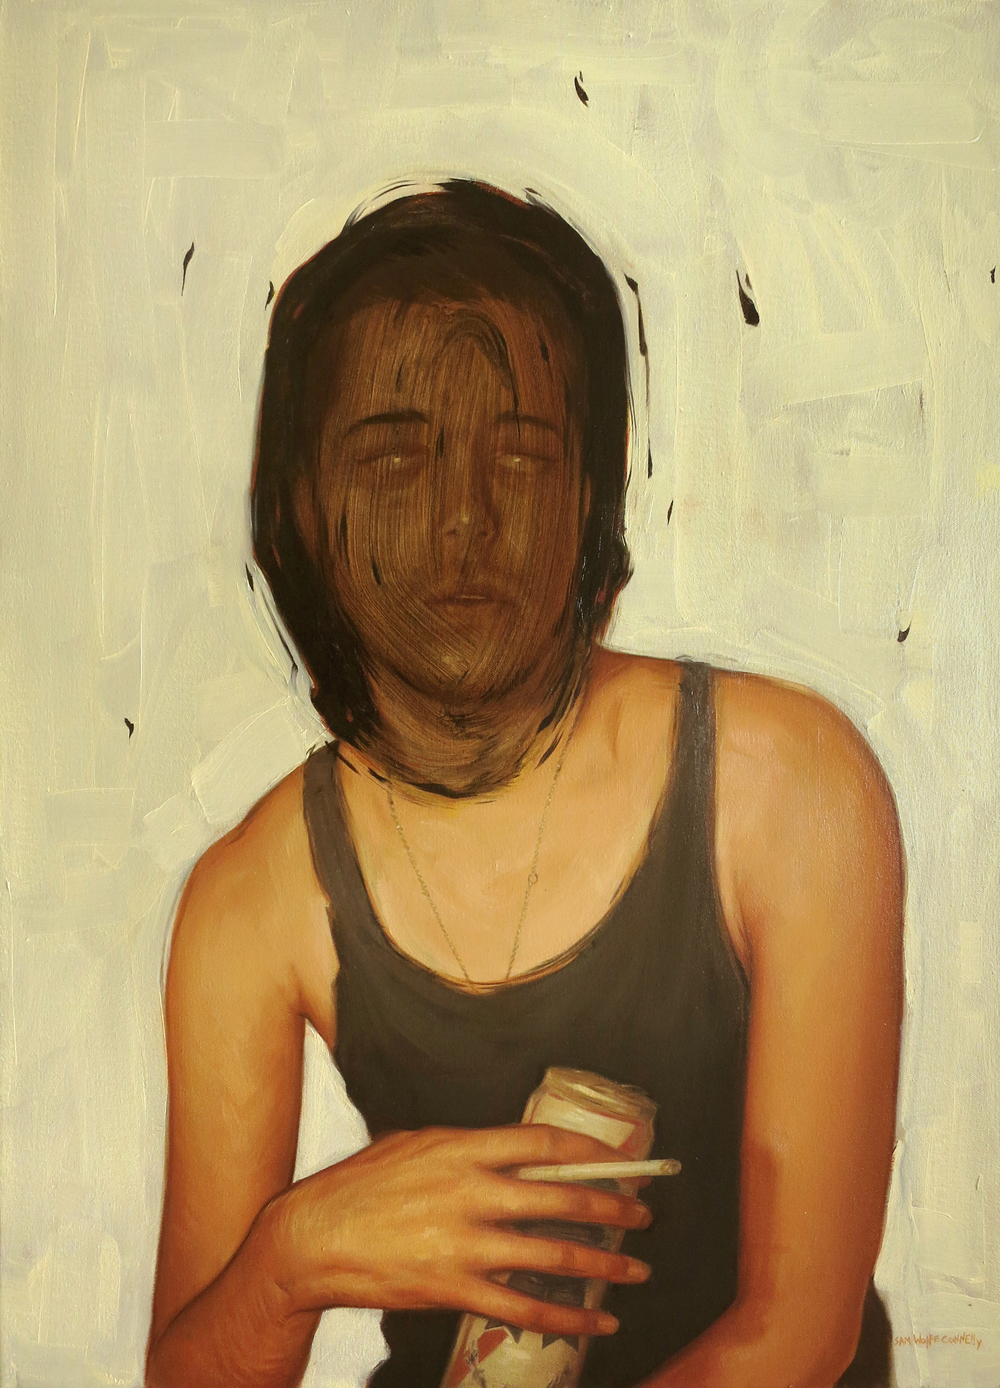 Sam Wolfe Connelly, "Untitled," 24 x 26 inches, Oil